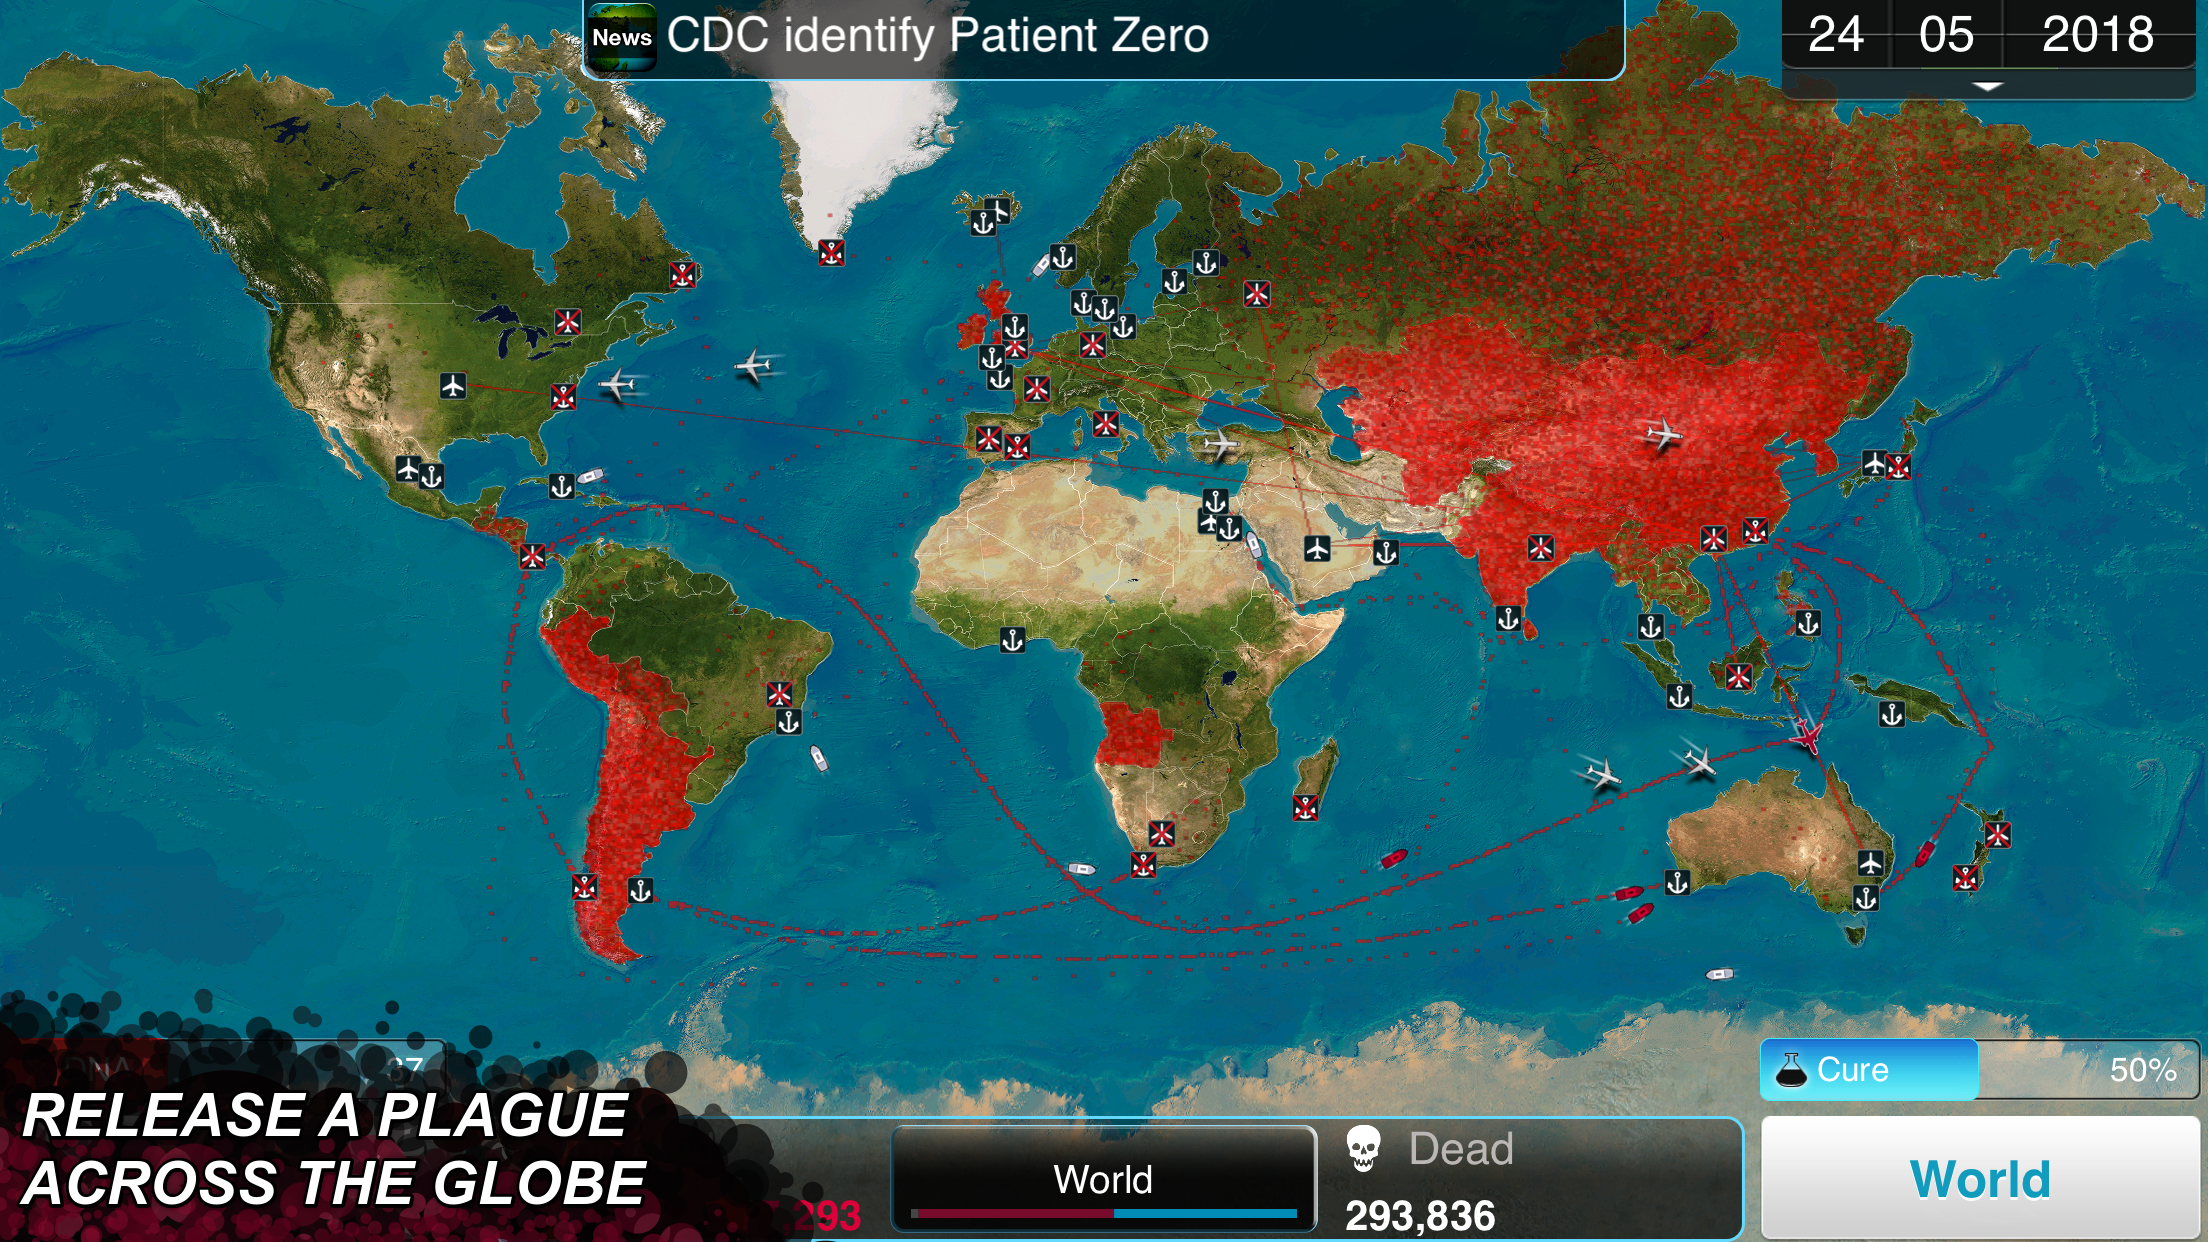 Image from Plague Inc.